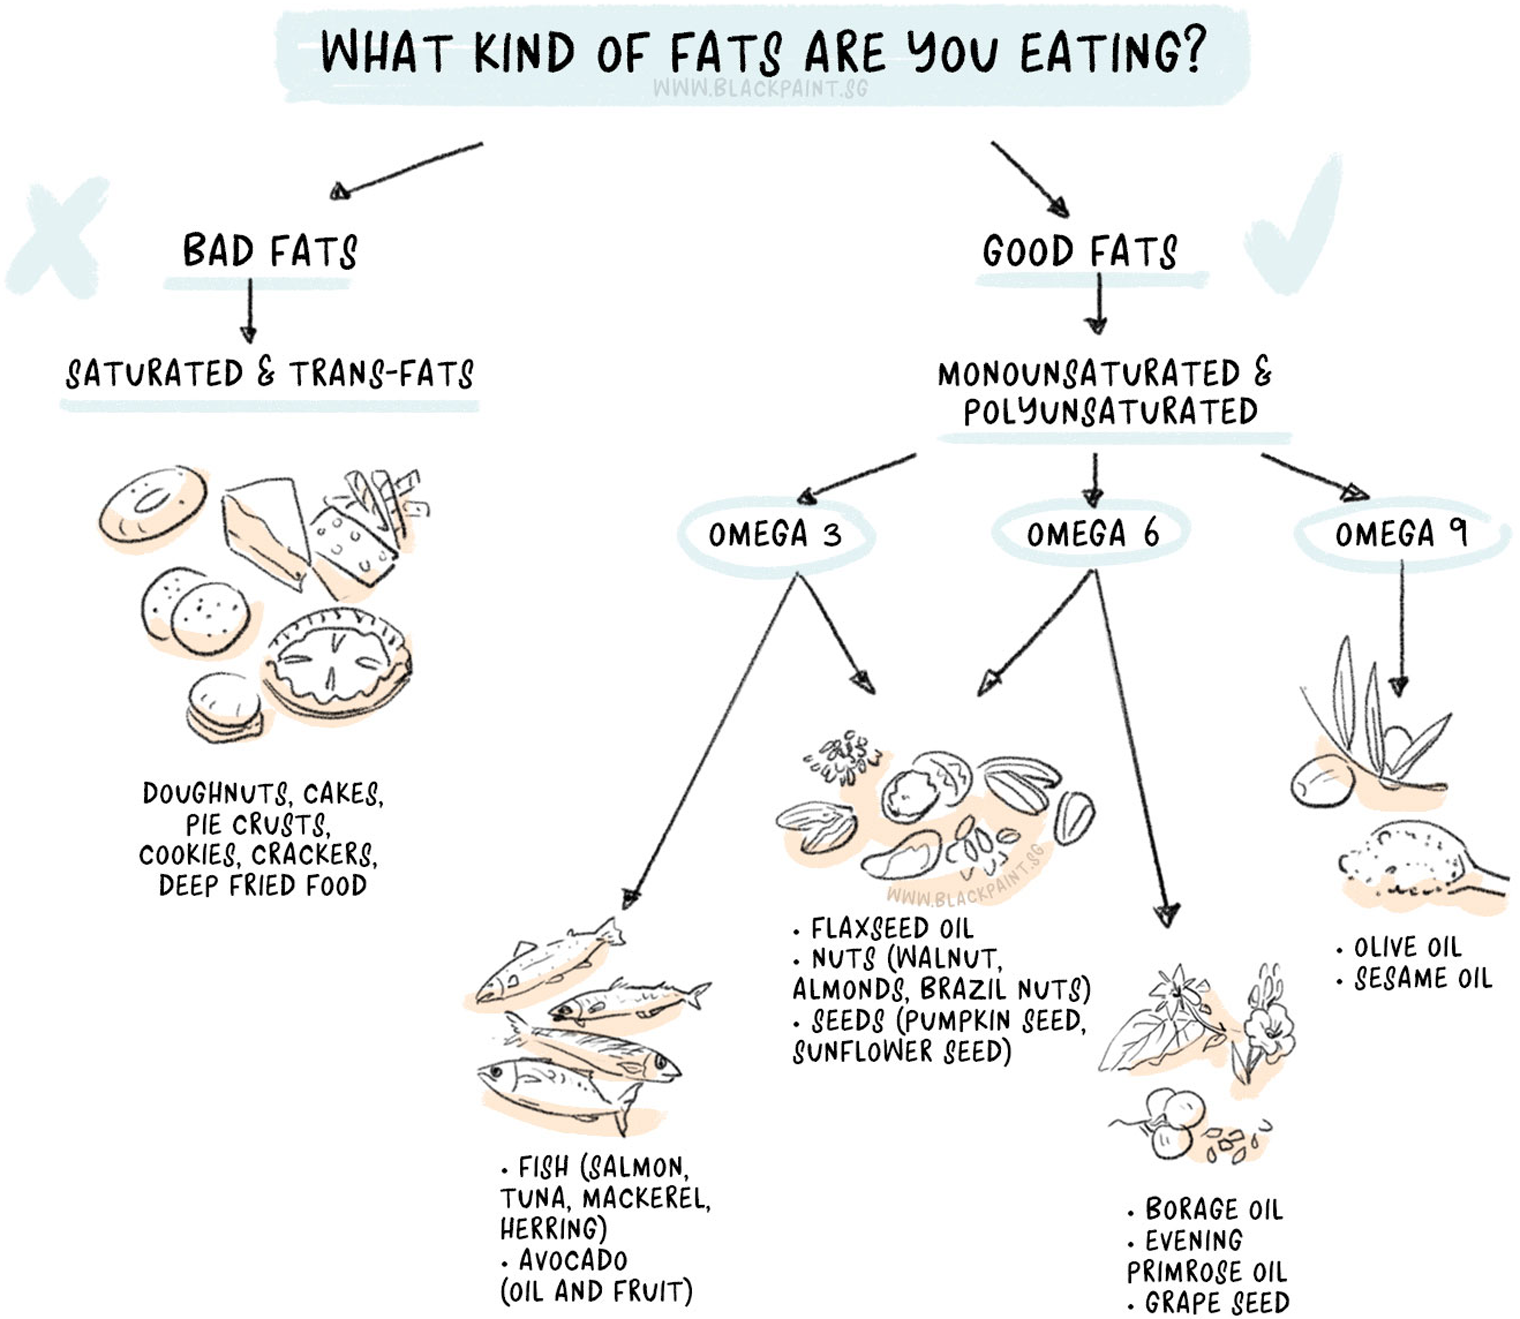 illustration of knowing what kind of fats you are eating, and whether it is good for you